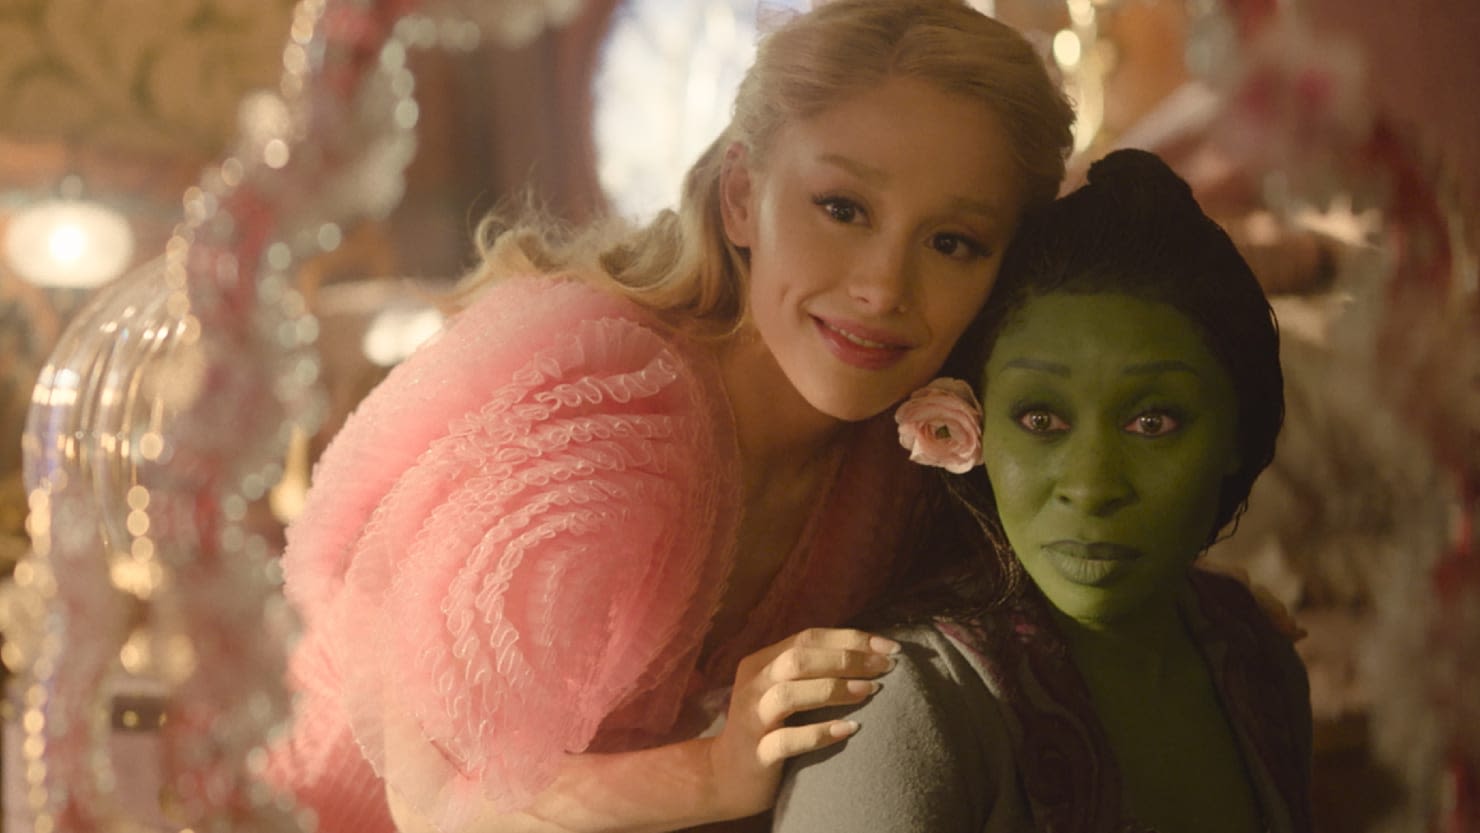 ‘Wicked’ Trailer Drops: Fans Are Losing Their Shiz